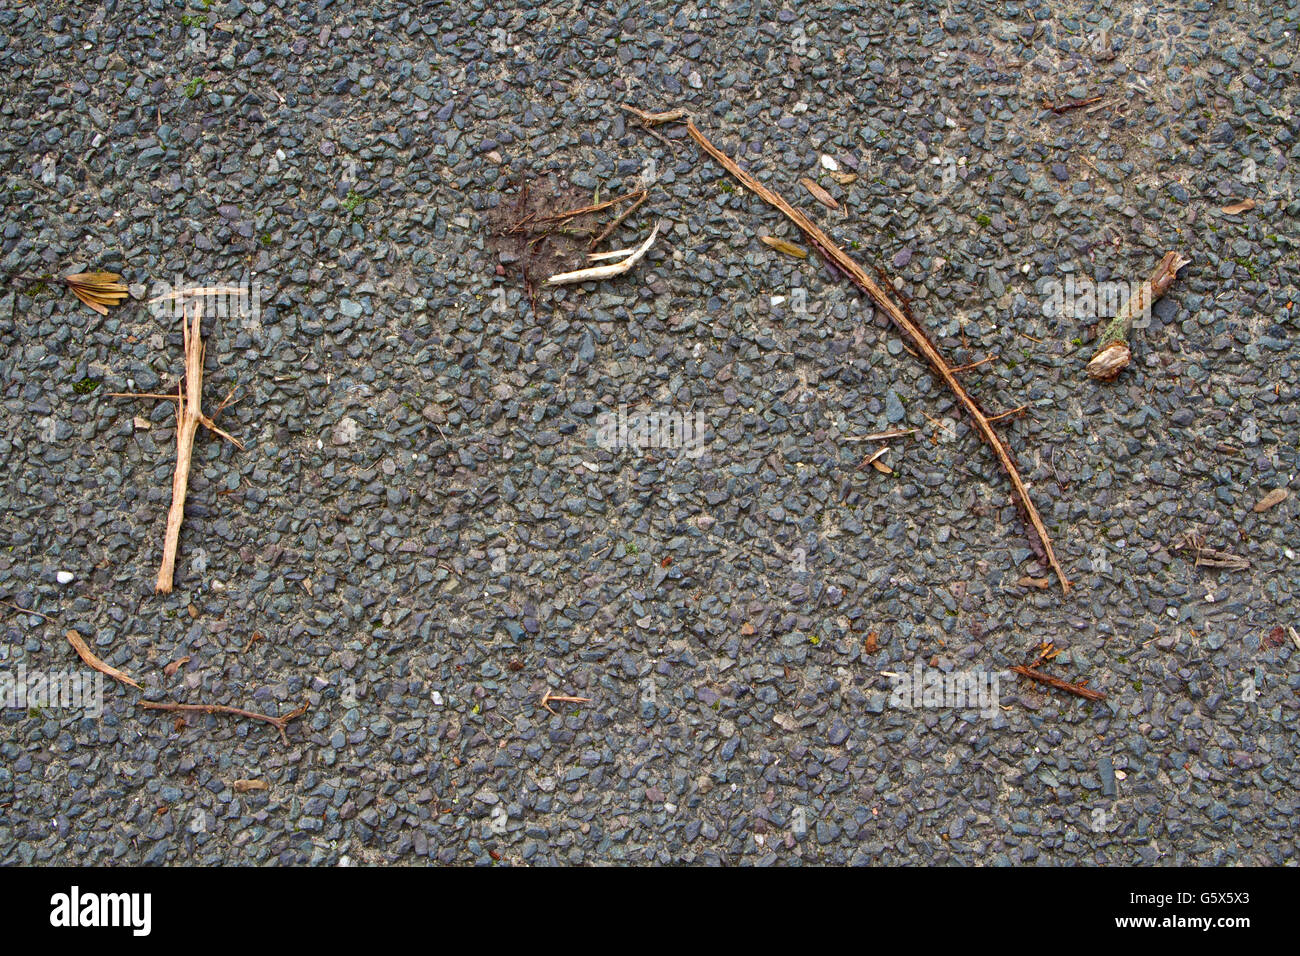 Twigs on a metaled road surface after a windy night Stock Photo